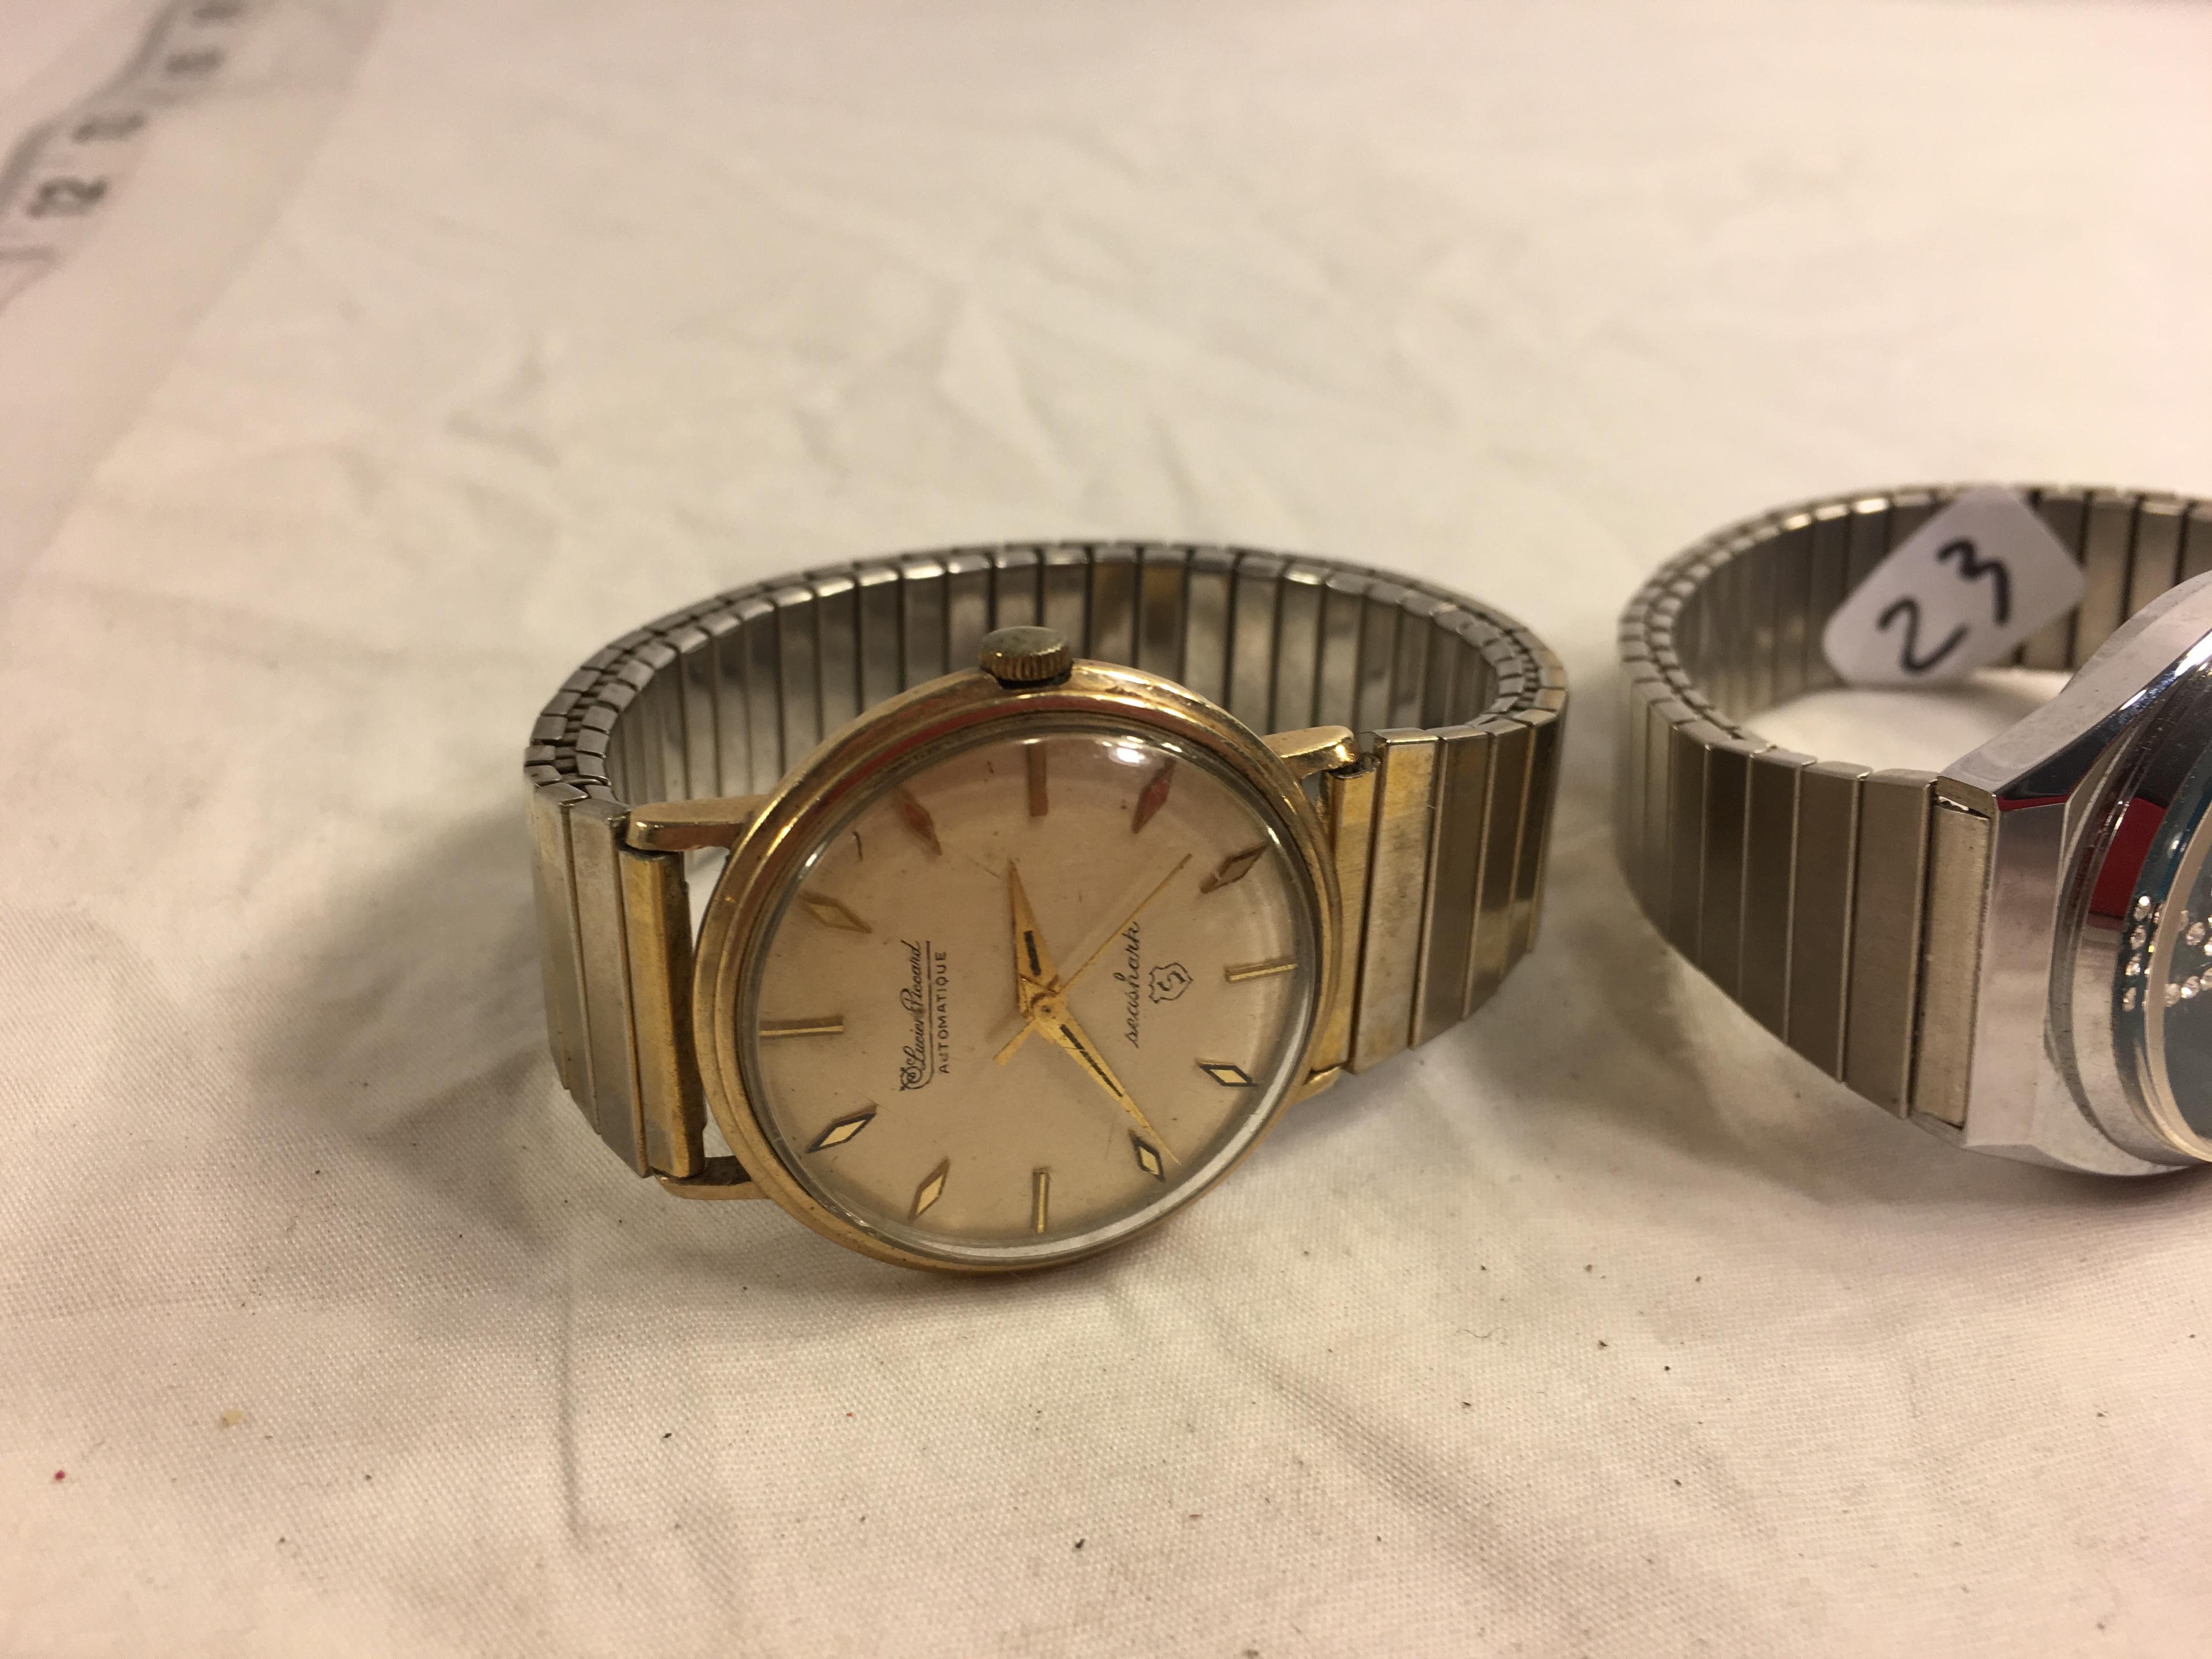 Lot of 3 Pieces Collector Loose Used Women's Watch - See Pictures